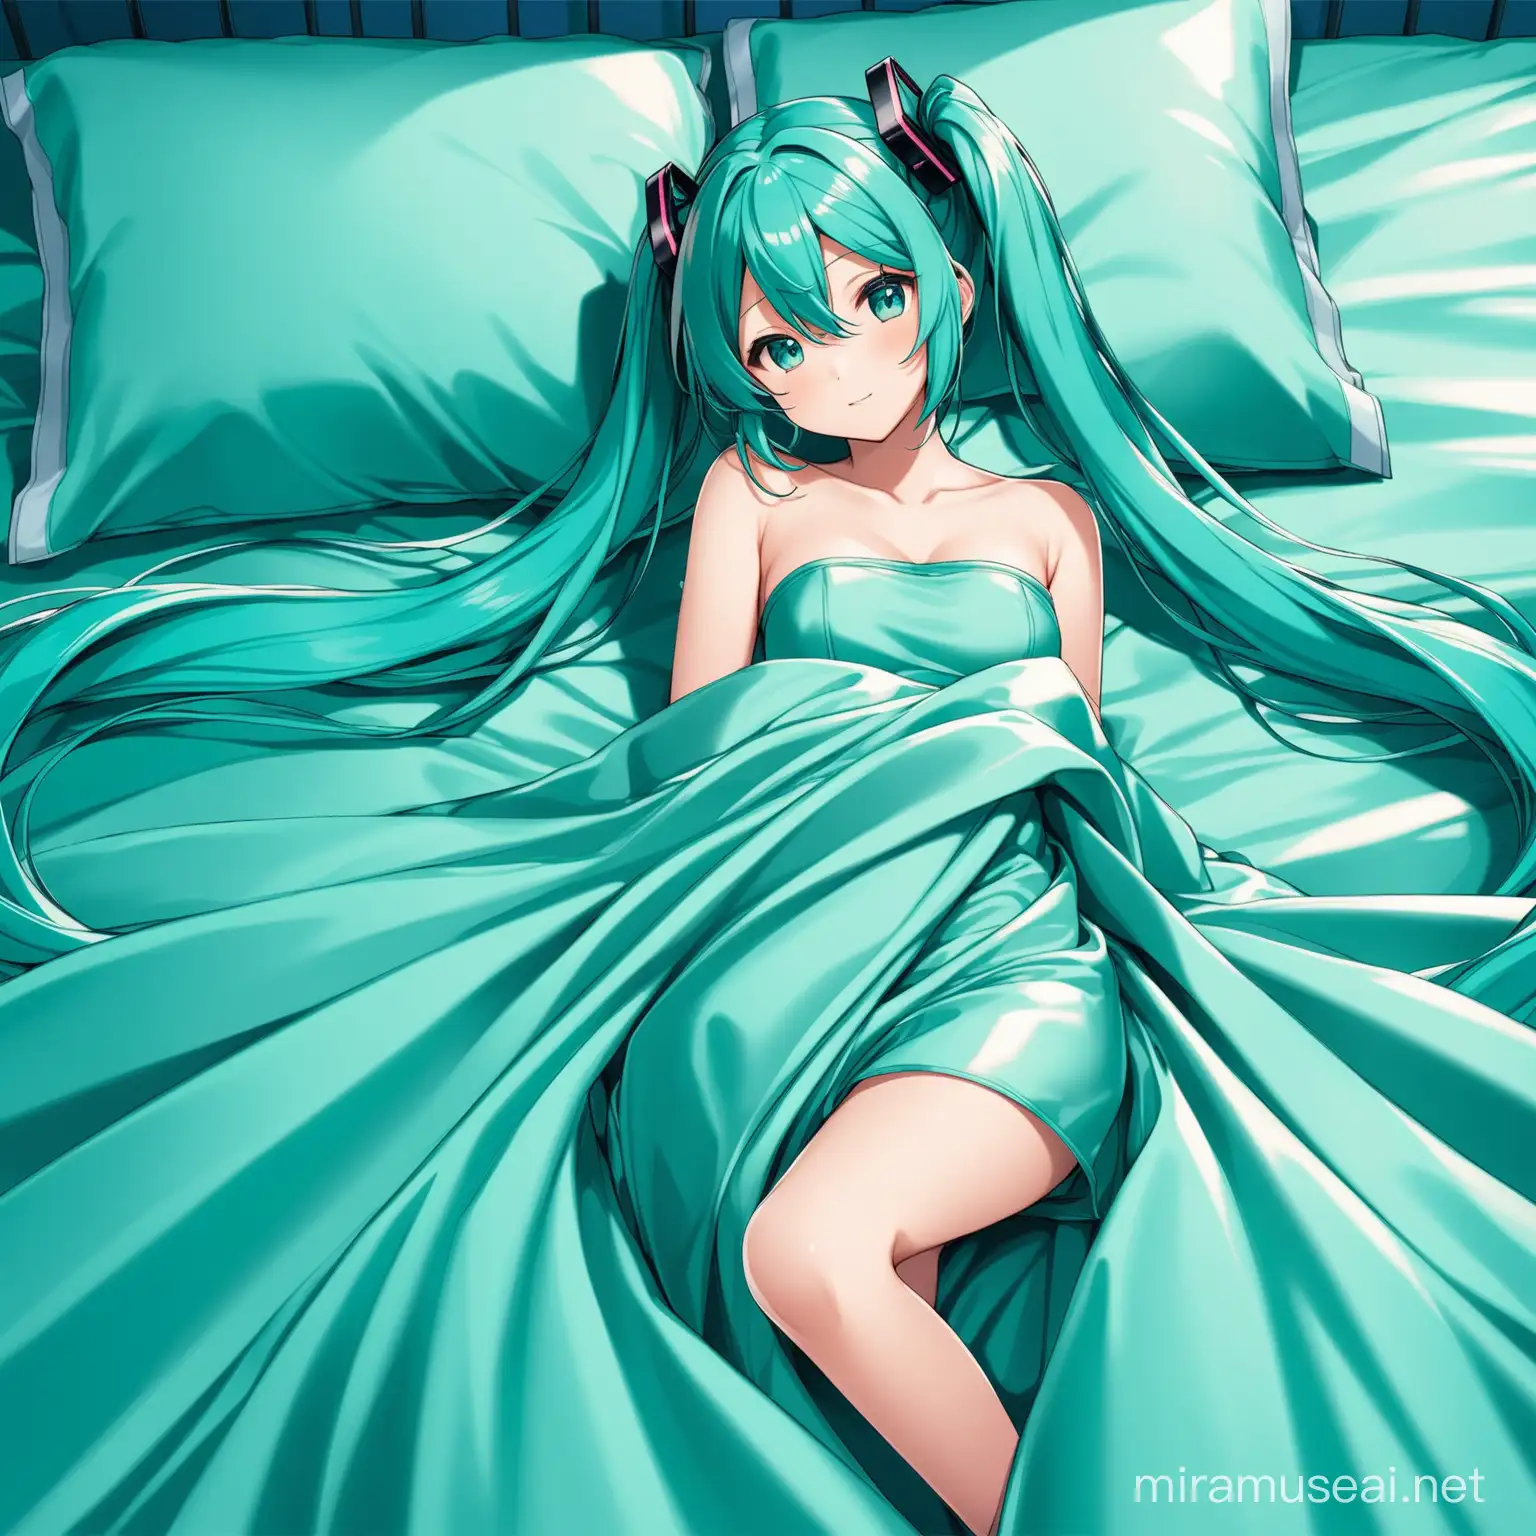 Hatsune Miku Relaxing on Teal Satin Bed with Strapless Sheet Cover